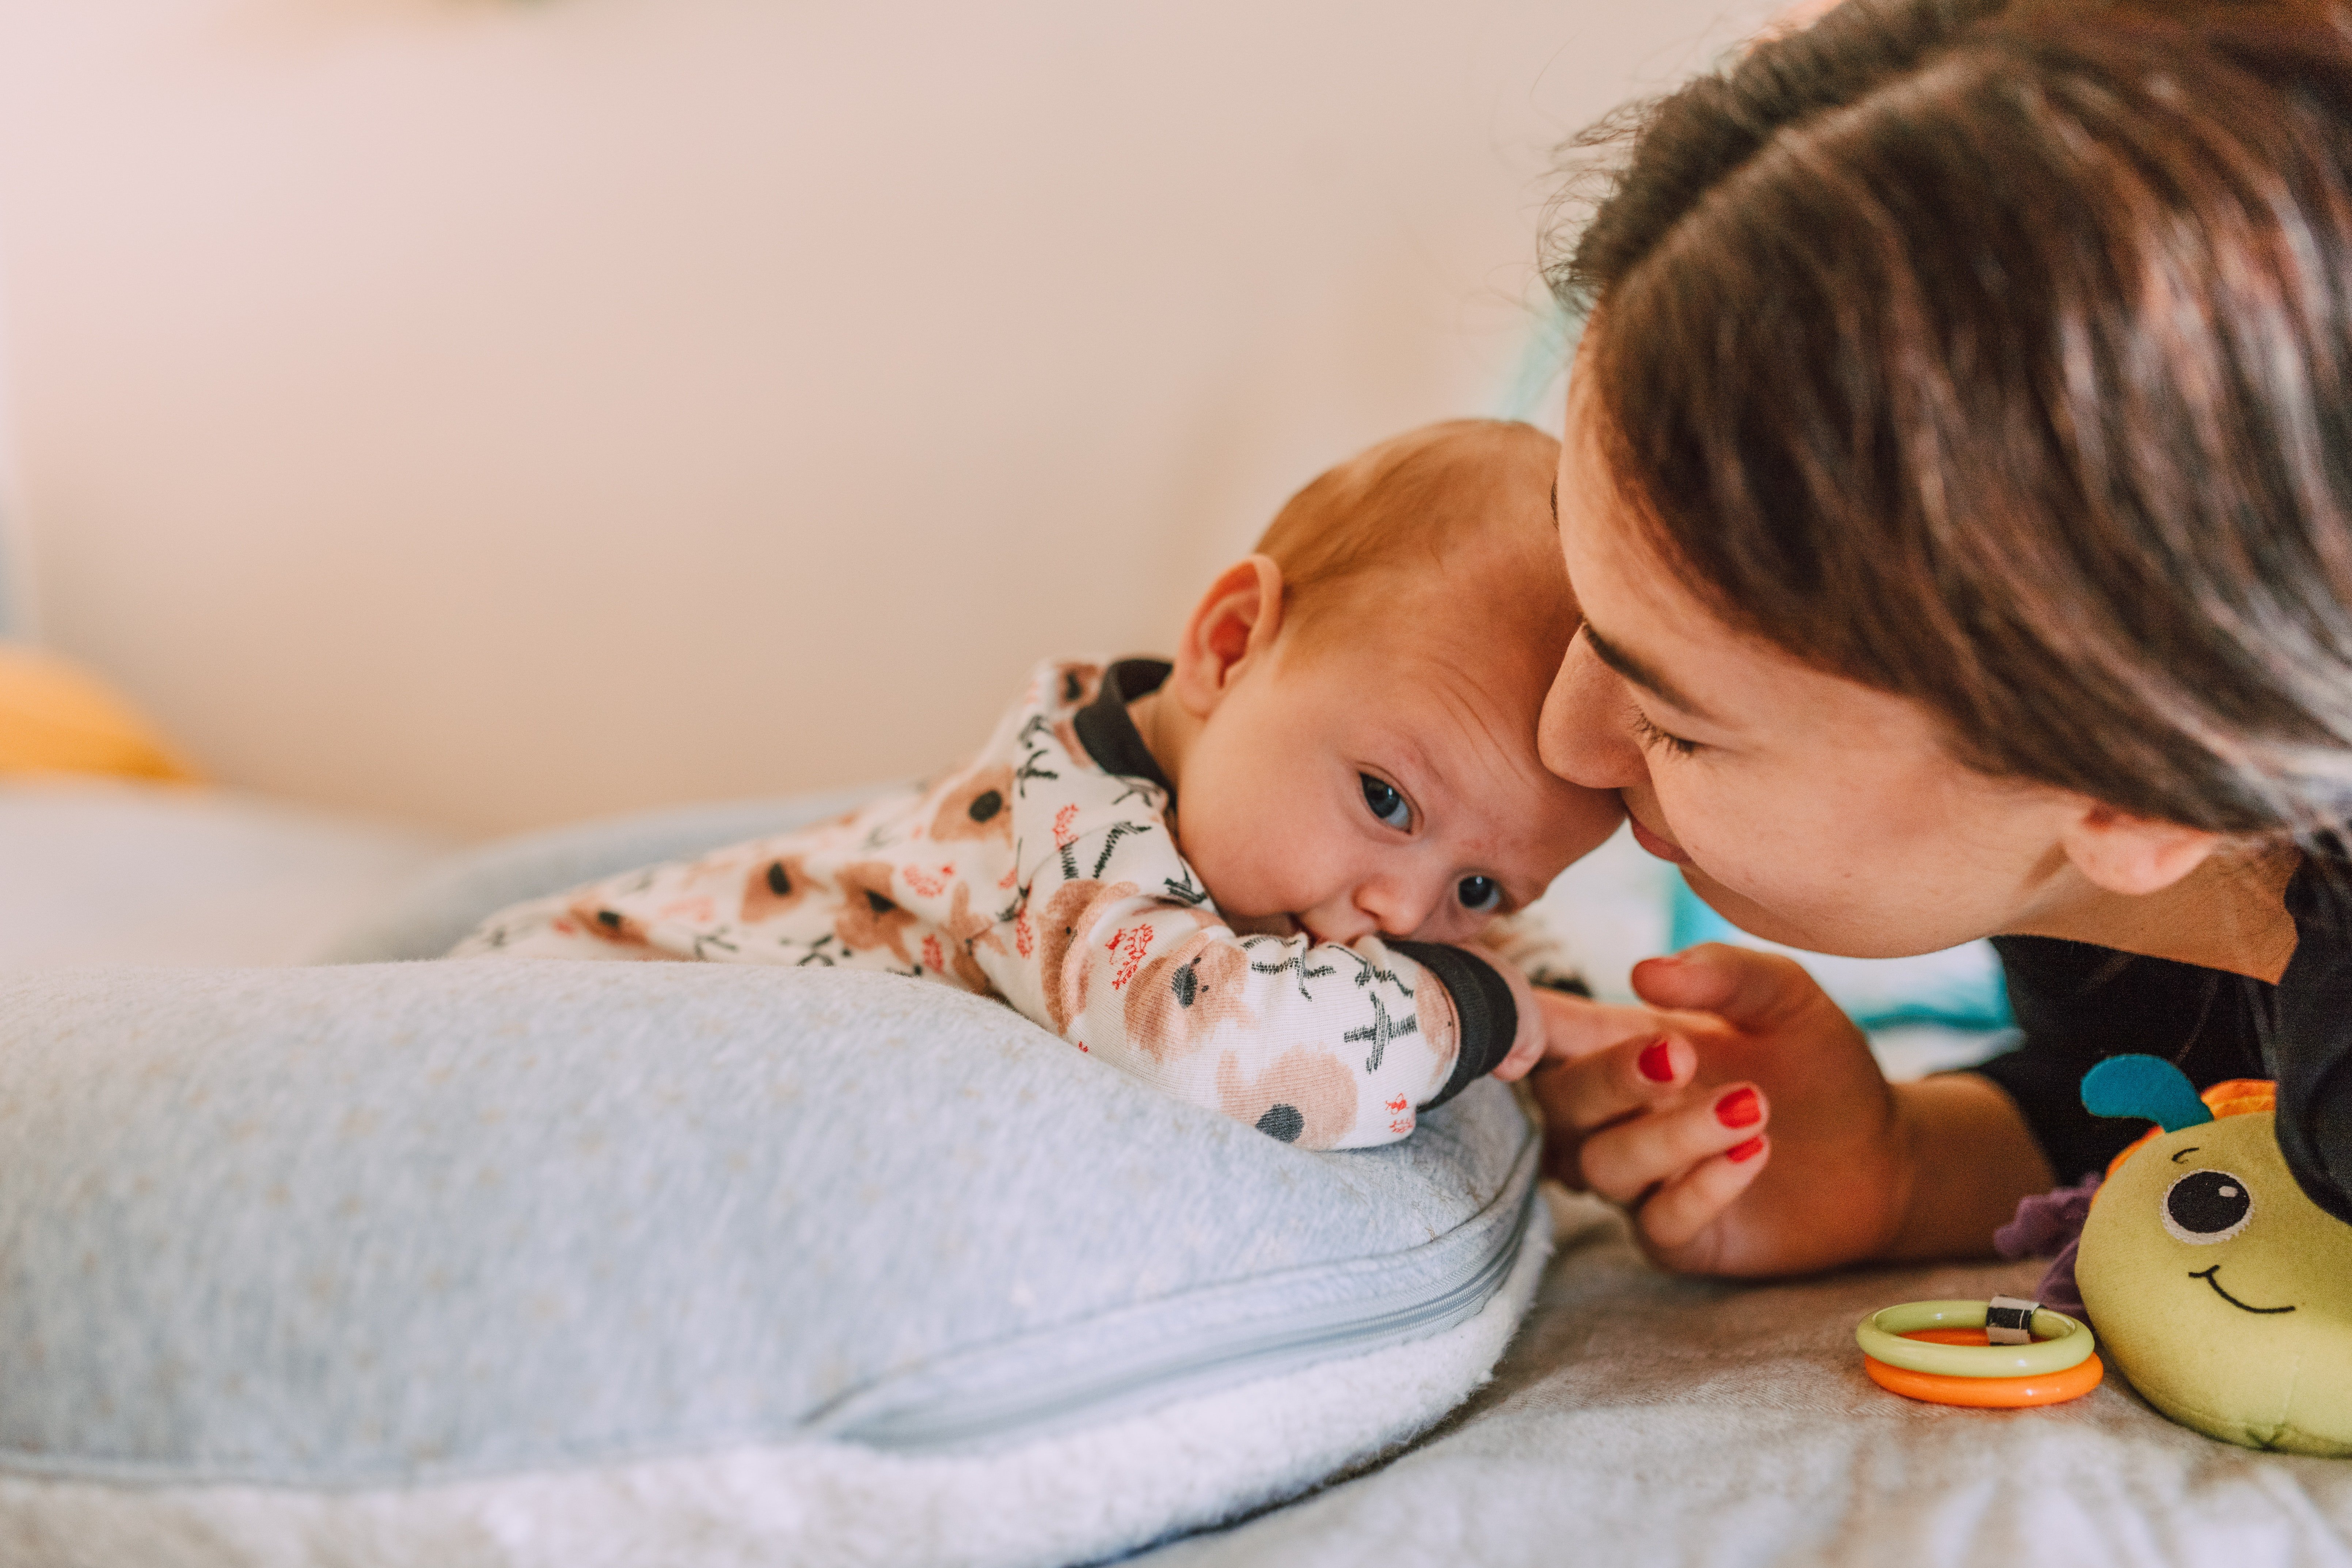 A woman playing with a newborn | Source: Pexels